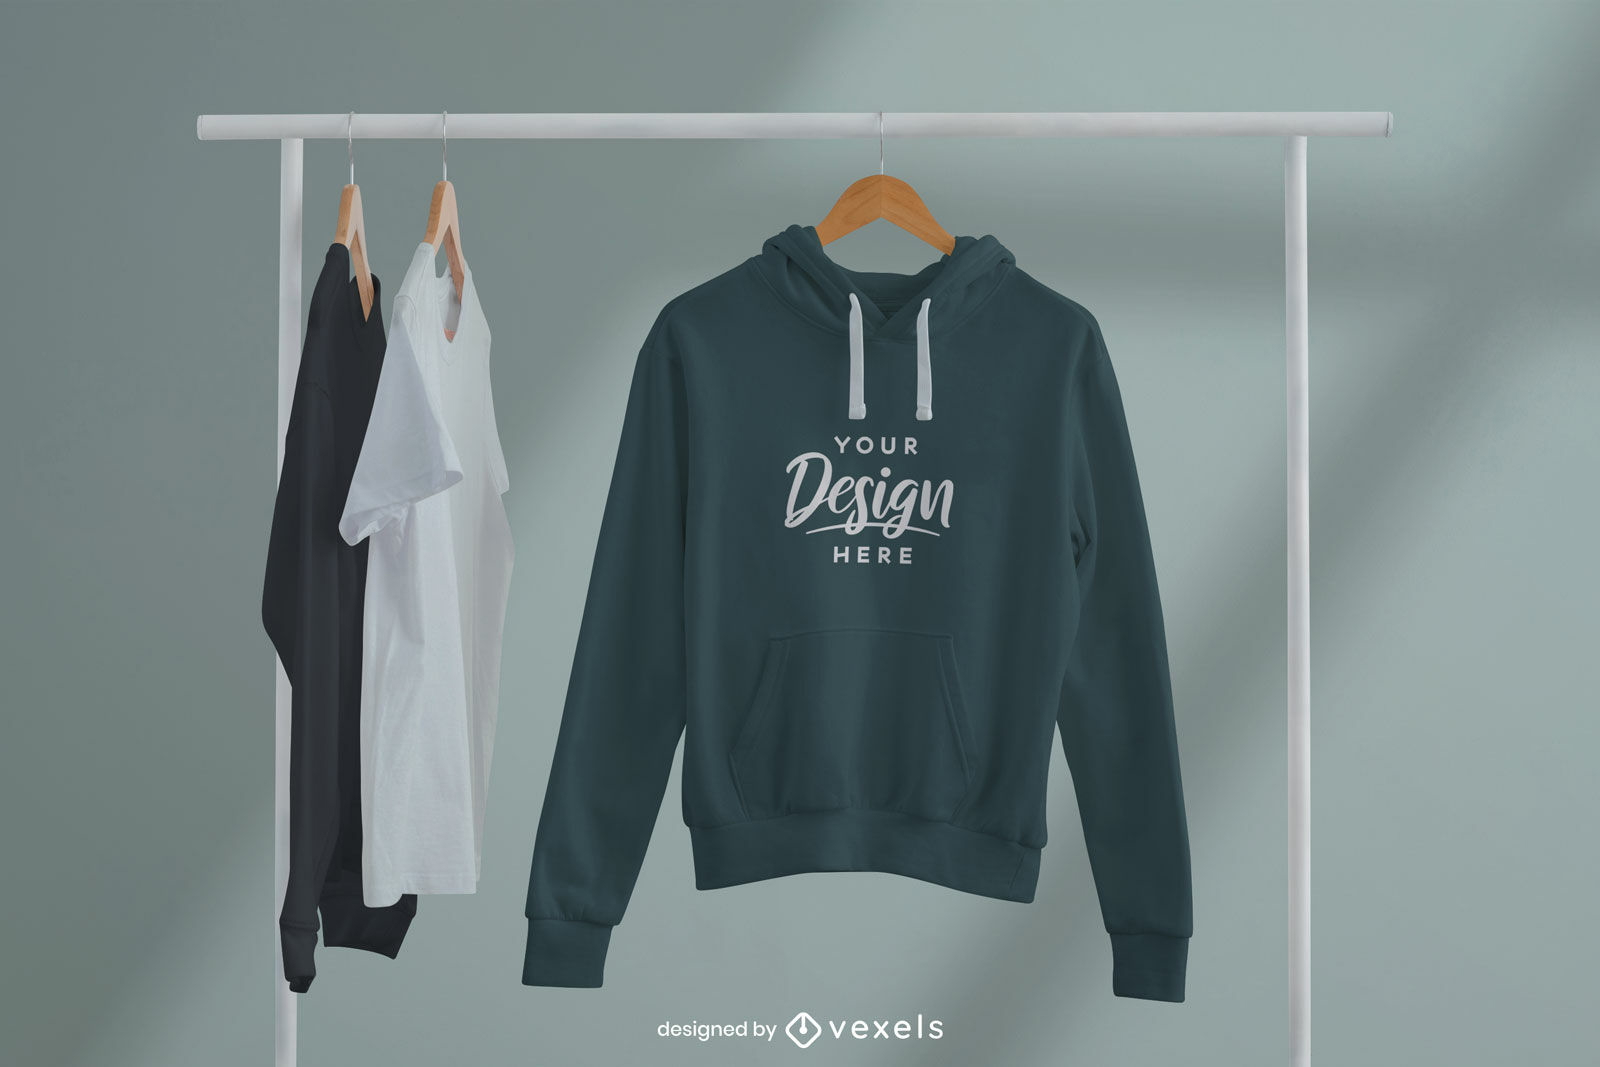 Hoodie with t-shirts on clothes hanger mockup